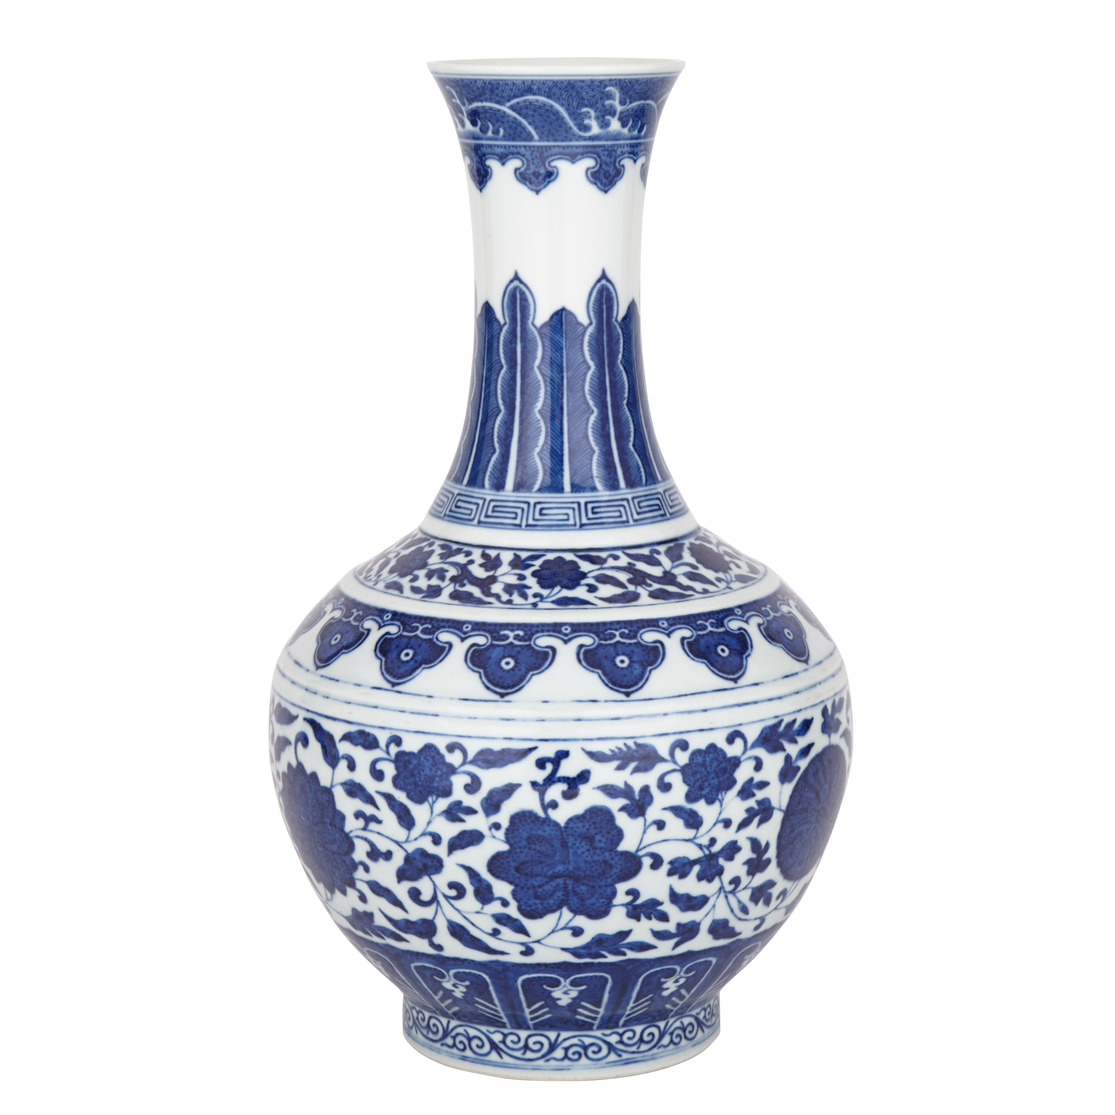 Fine Blue and White Bottle Vase, Guangxu Six-Character Mark in Underglaze Blue and of the Period (1875-1908)